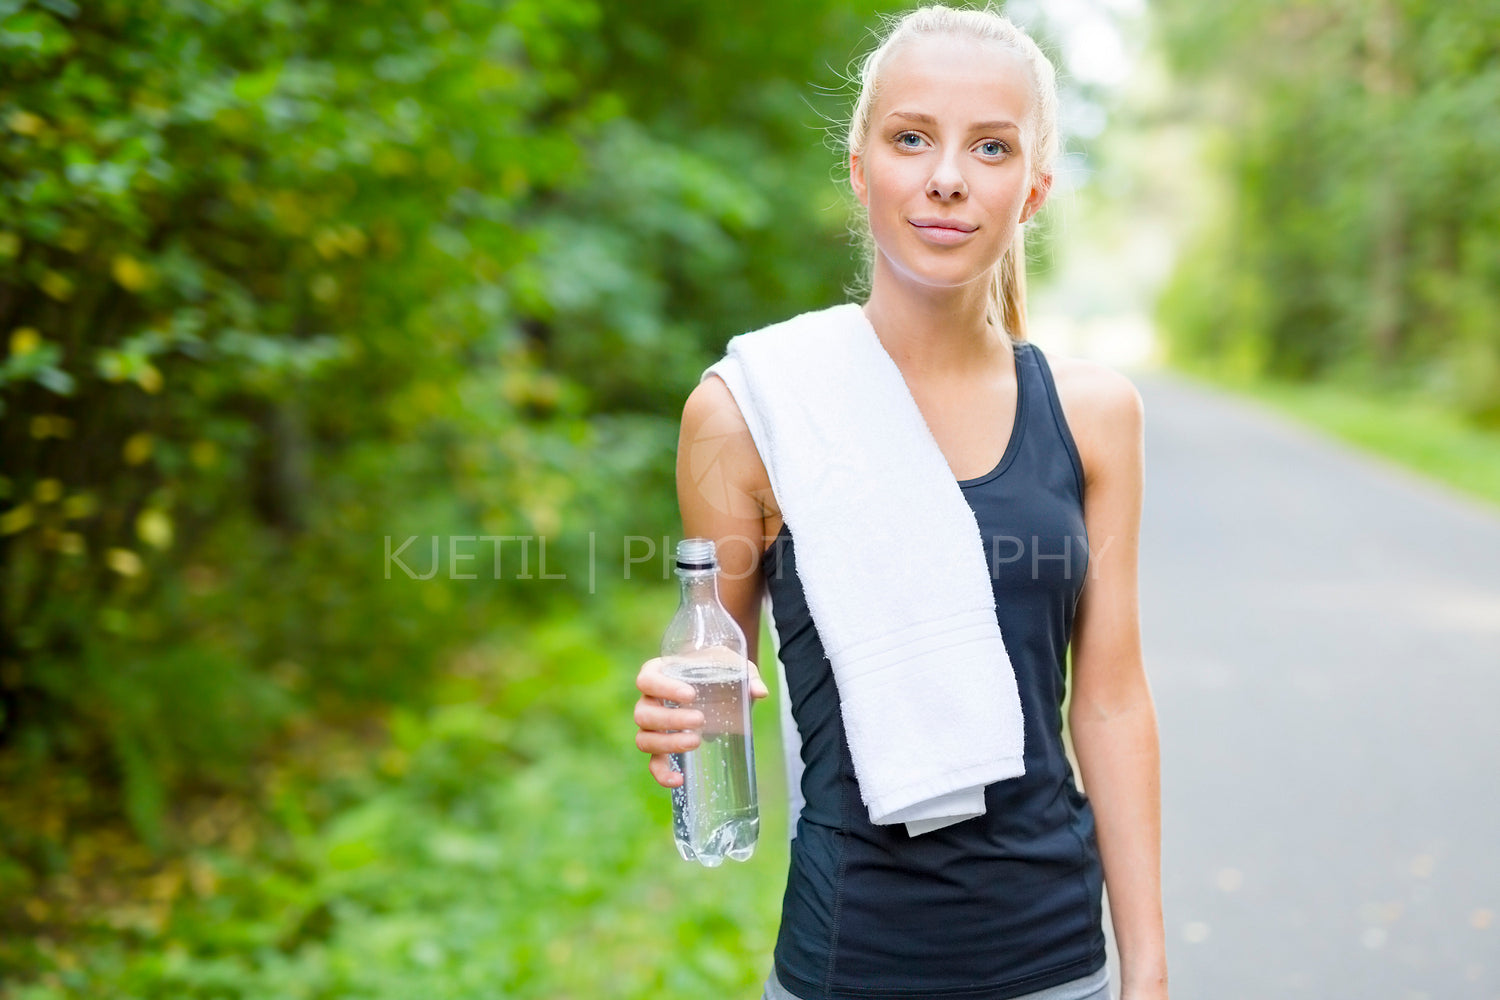 Smiling young woman having her break after running